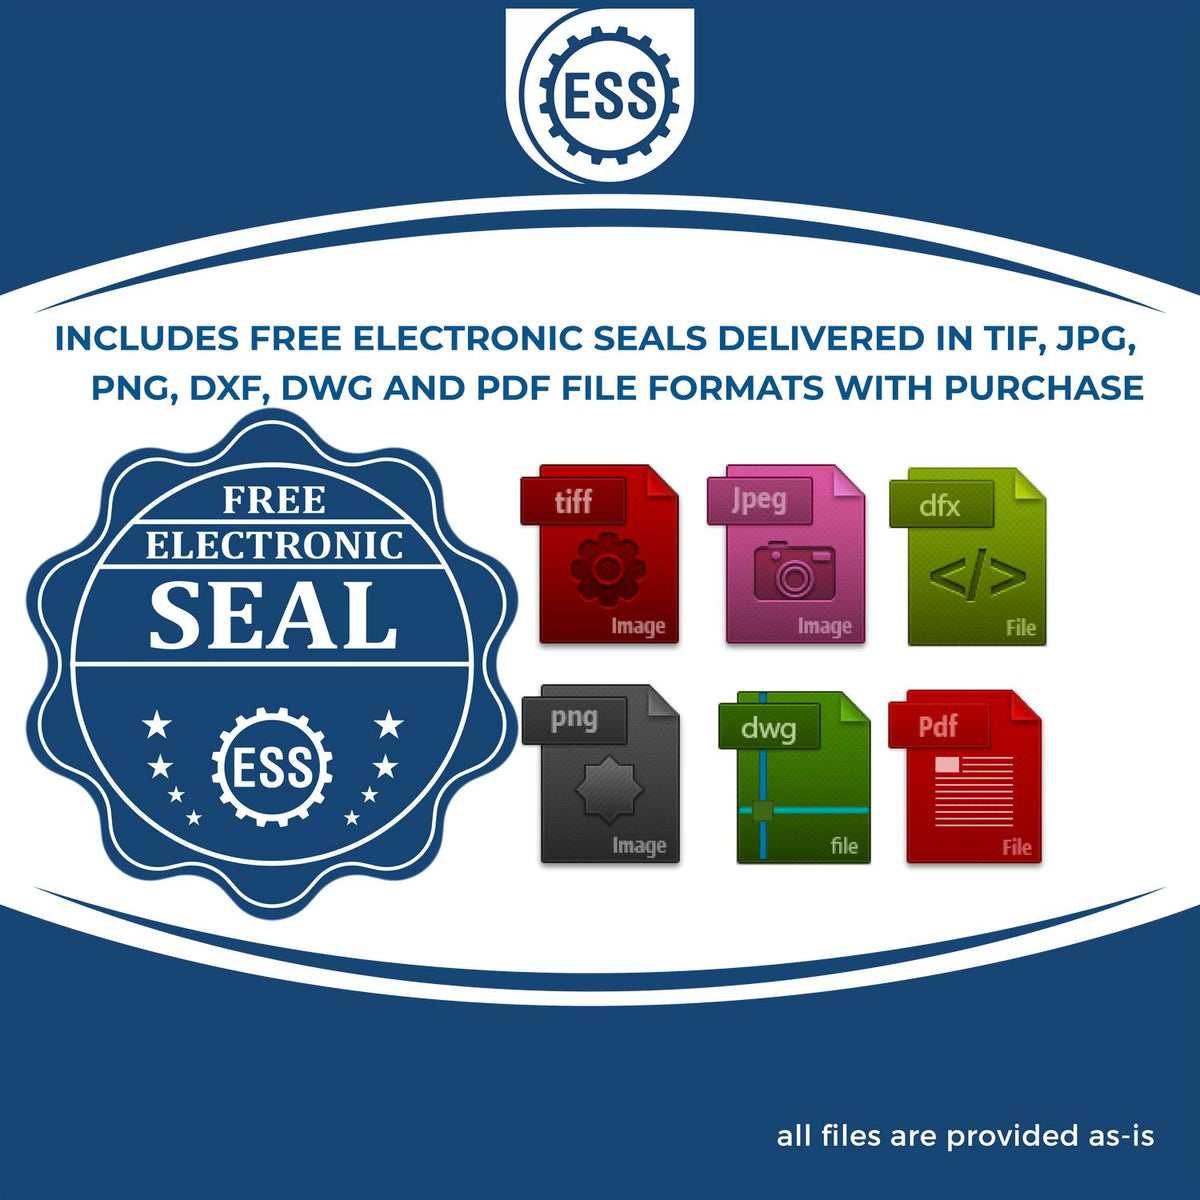 An infographic for the free electronic seal for the South Carolina Professional Geologist Seal Stamp illustrating the different file type icons such as DXF, DWG, TIF, JPG and PNG.